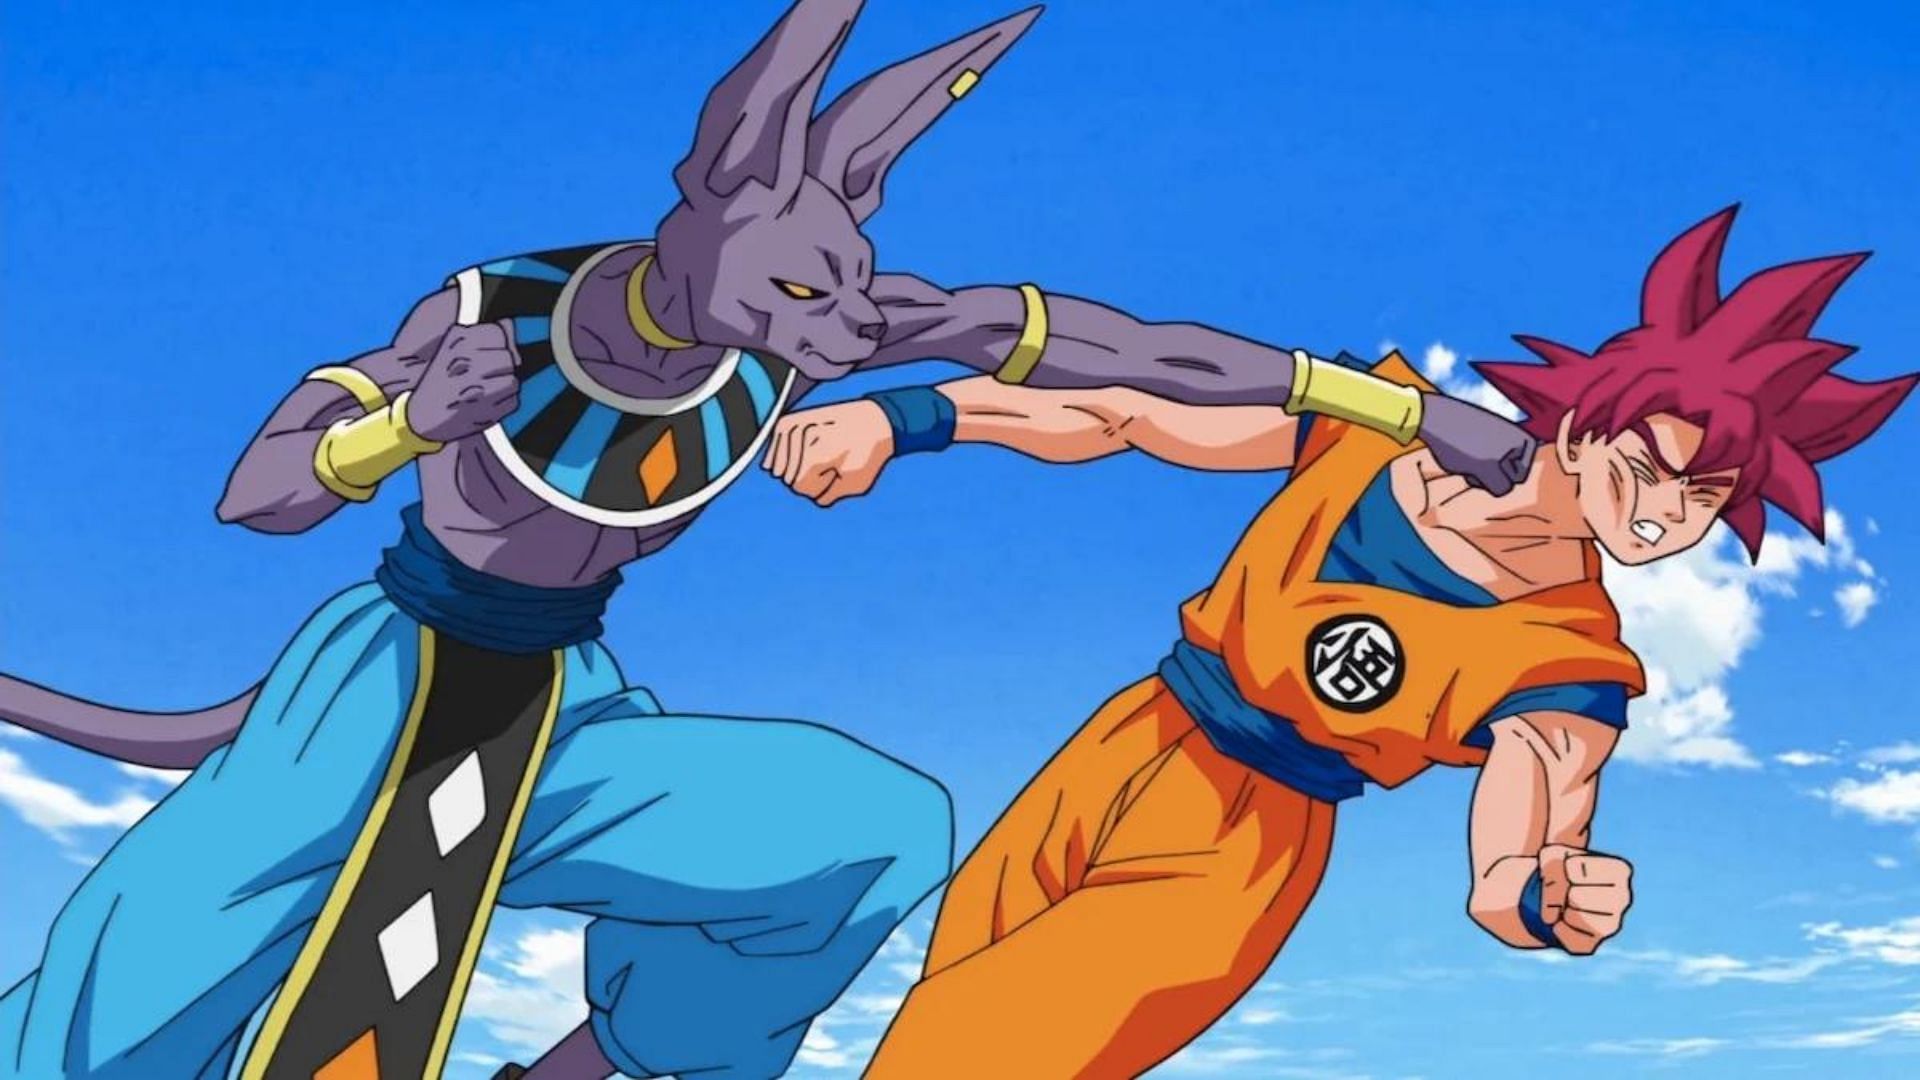 Goku and Beerus as shown in anime (Image via Toei Animation)